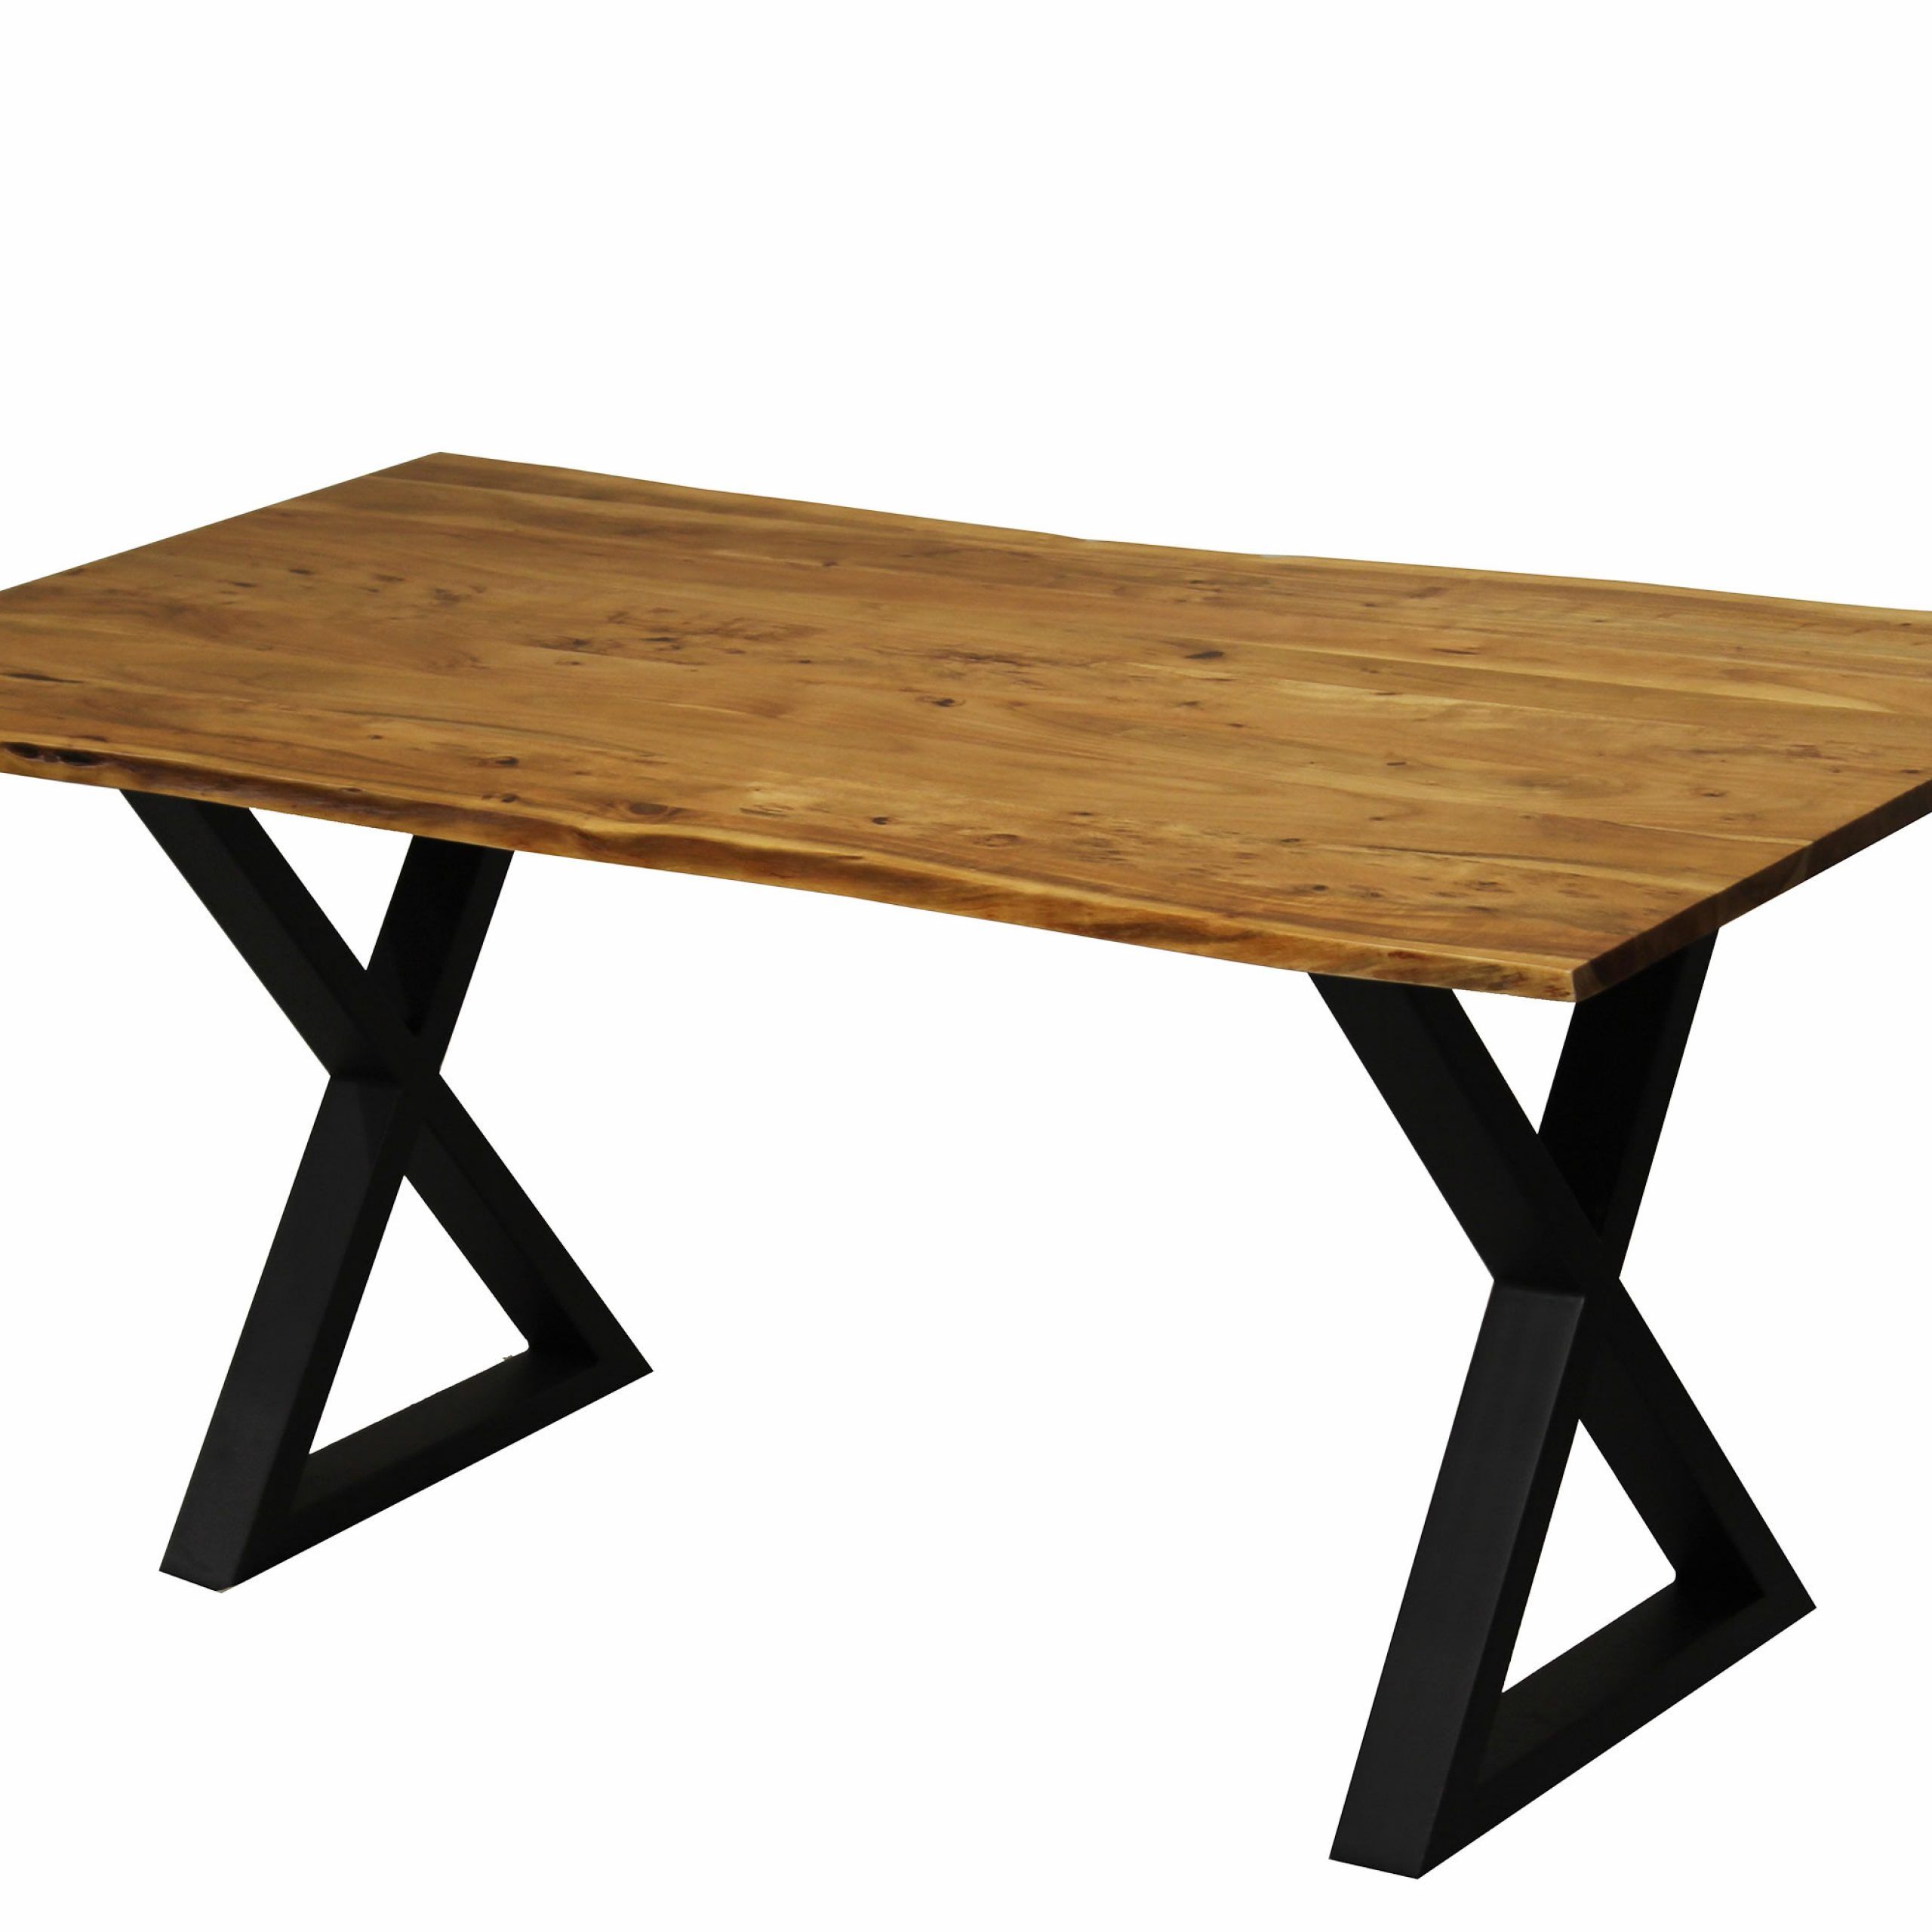 2017 Acacia Dining Tables With Black X Legs Pertaining To Zen Live Edge 67 Inches Dining Table (acacia – Black X Legs) (View 5 of 30)